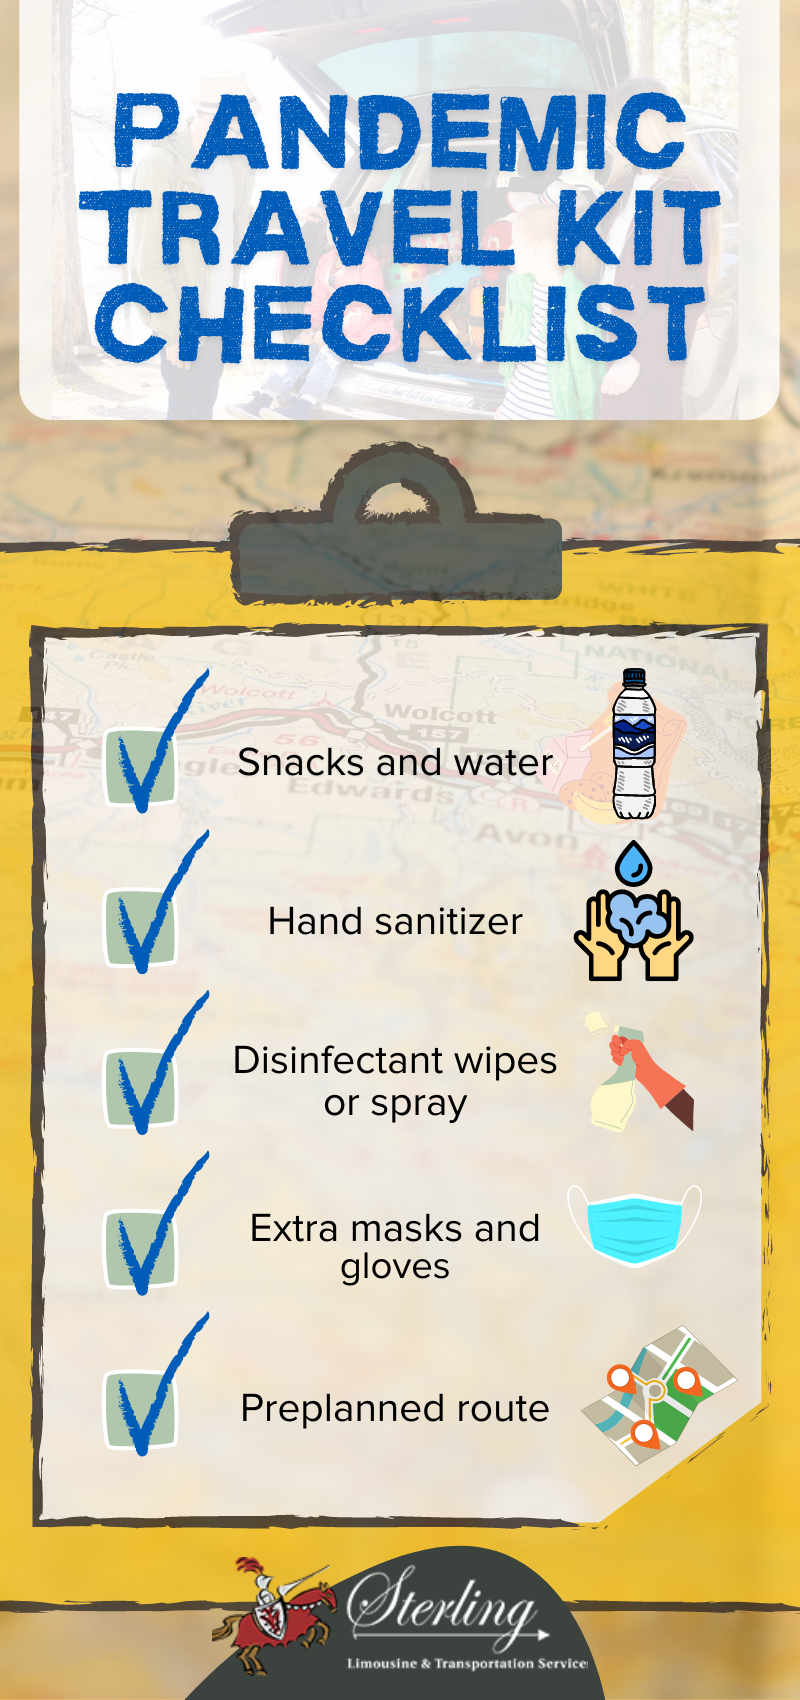 Infographic depicting a pandemic travel check list